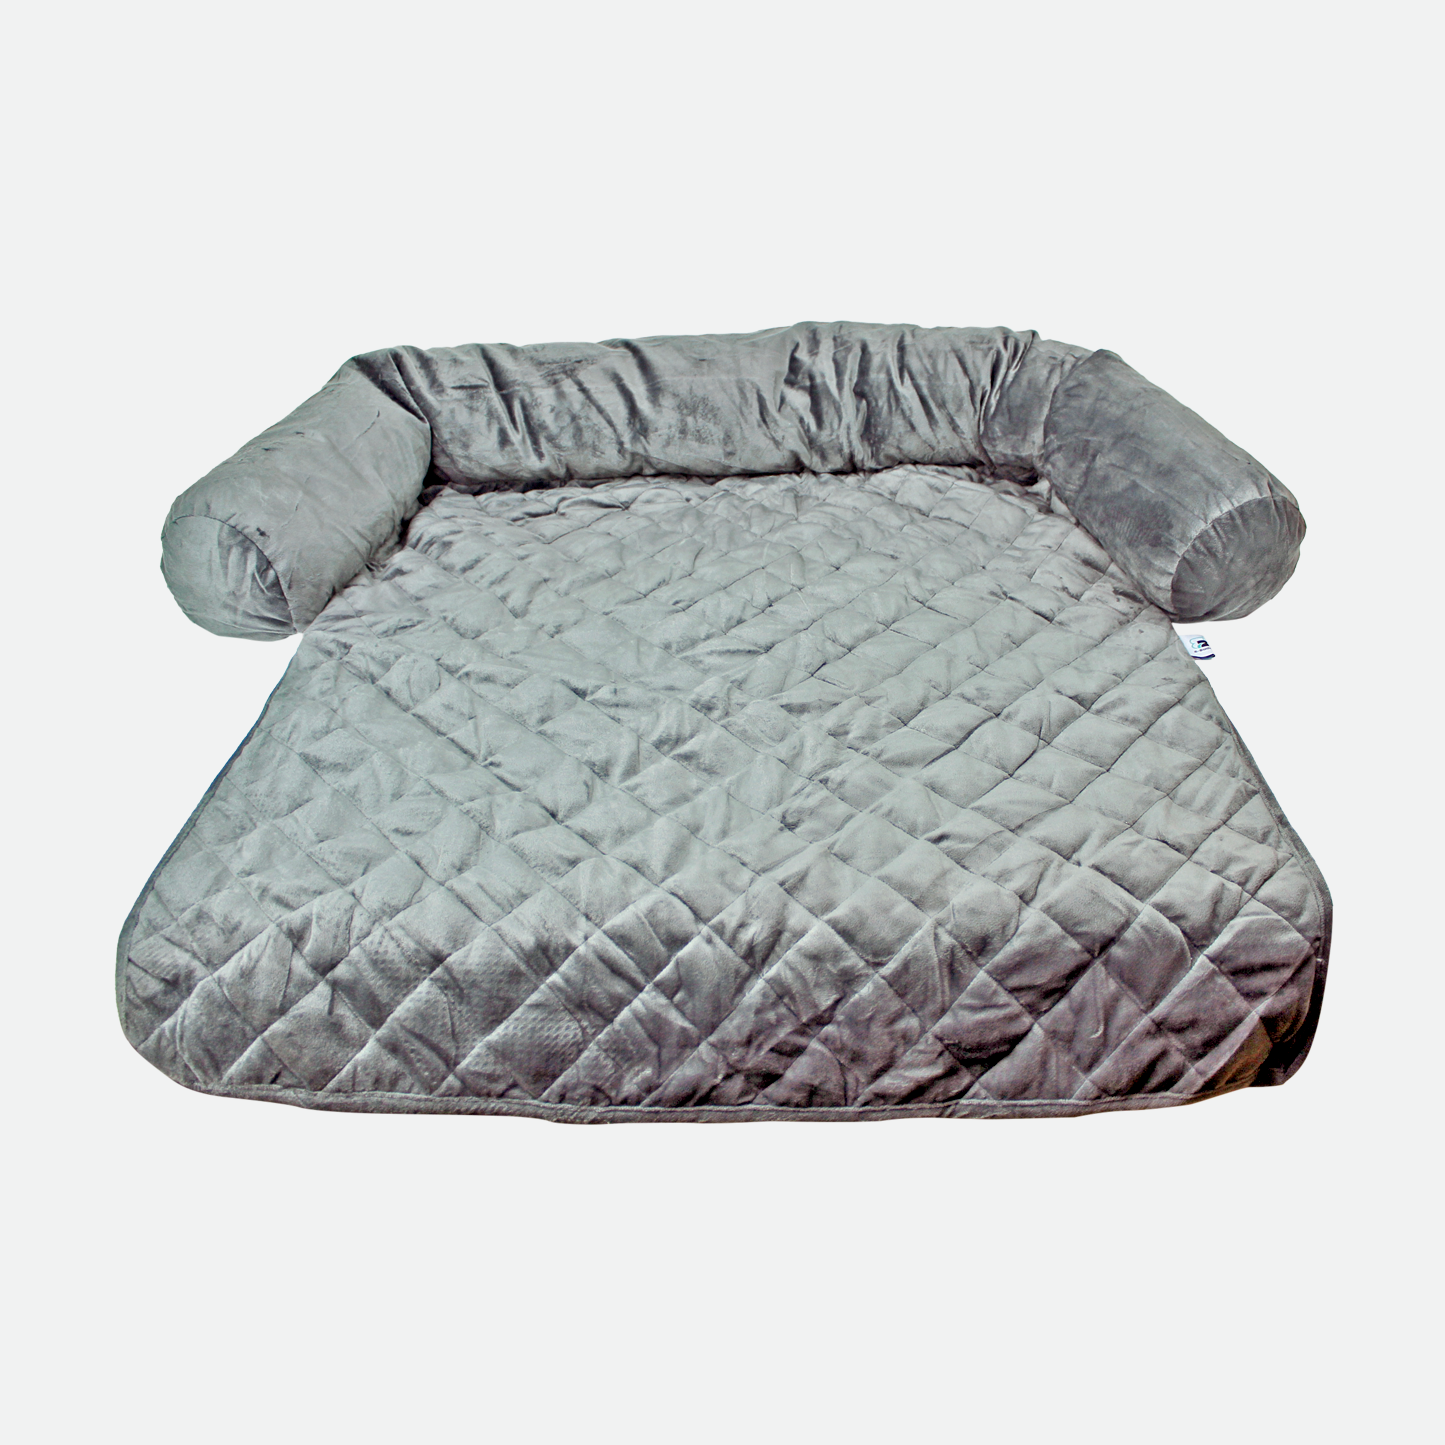 Soft blanket for pet with padded sides